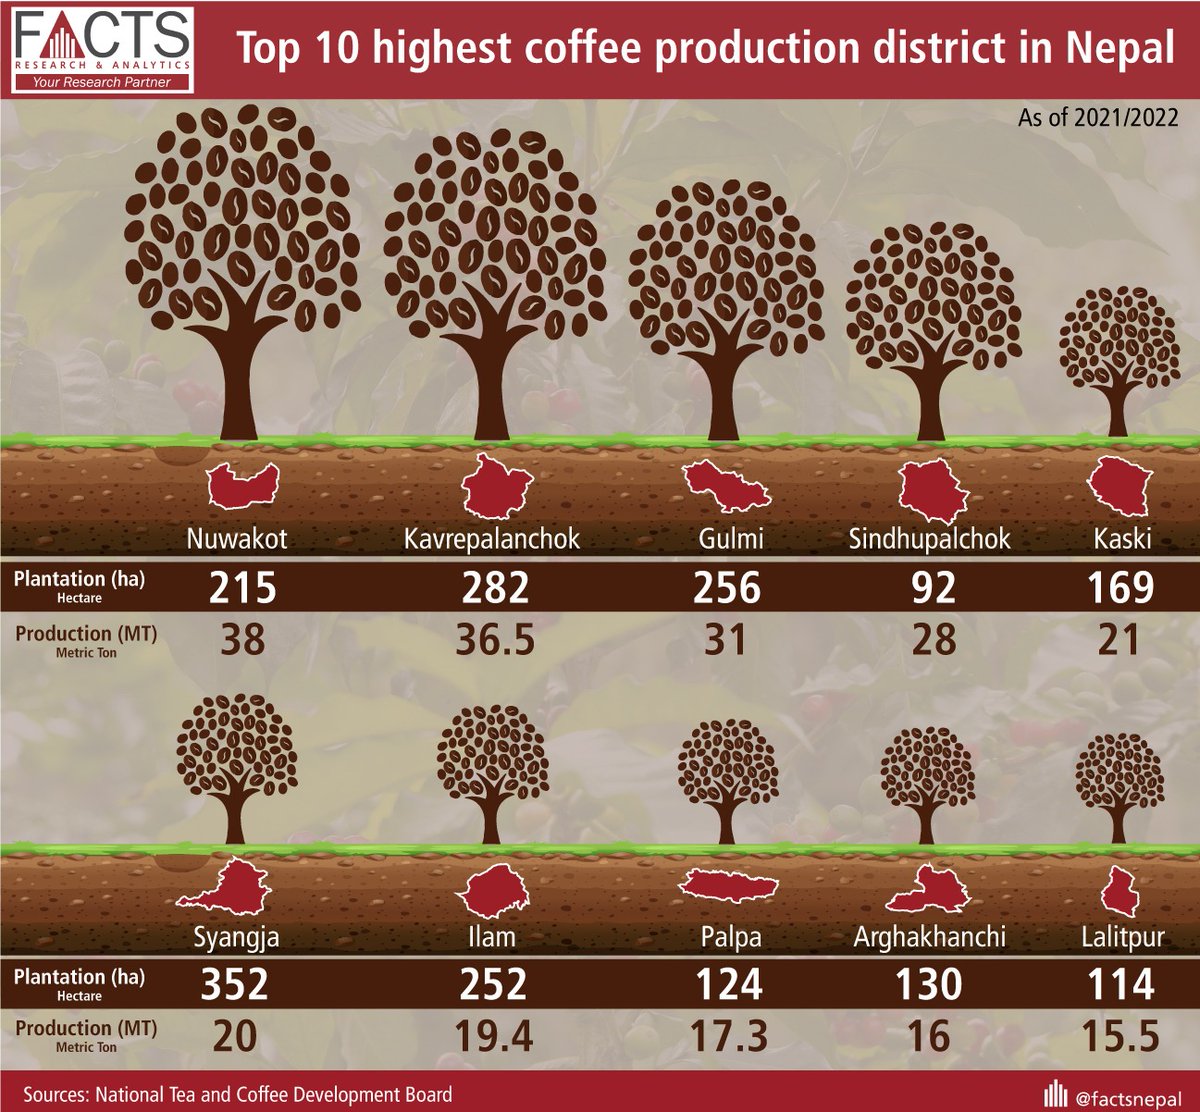 Top 10 highest coffee production district in Nepal
#facts #Nepal #FOD #factsoftheday #coffee #coffeeproduction